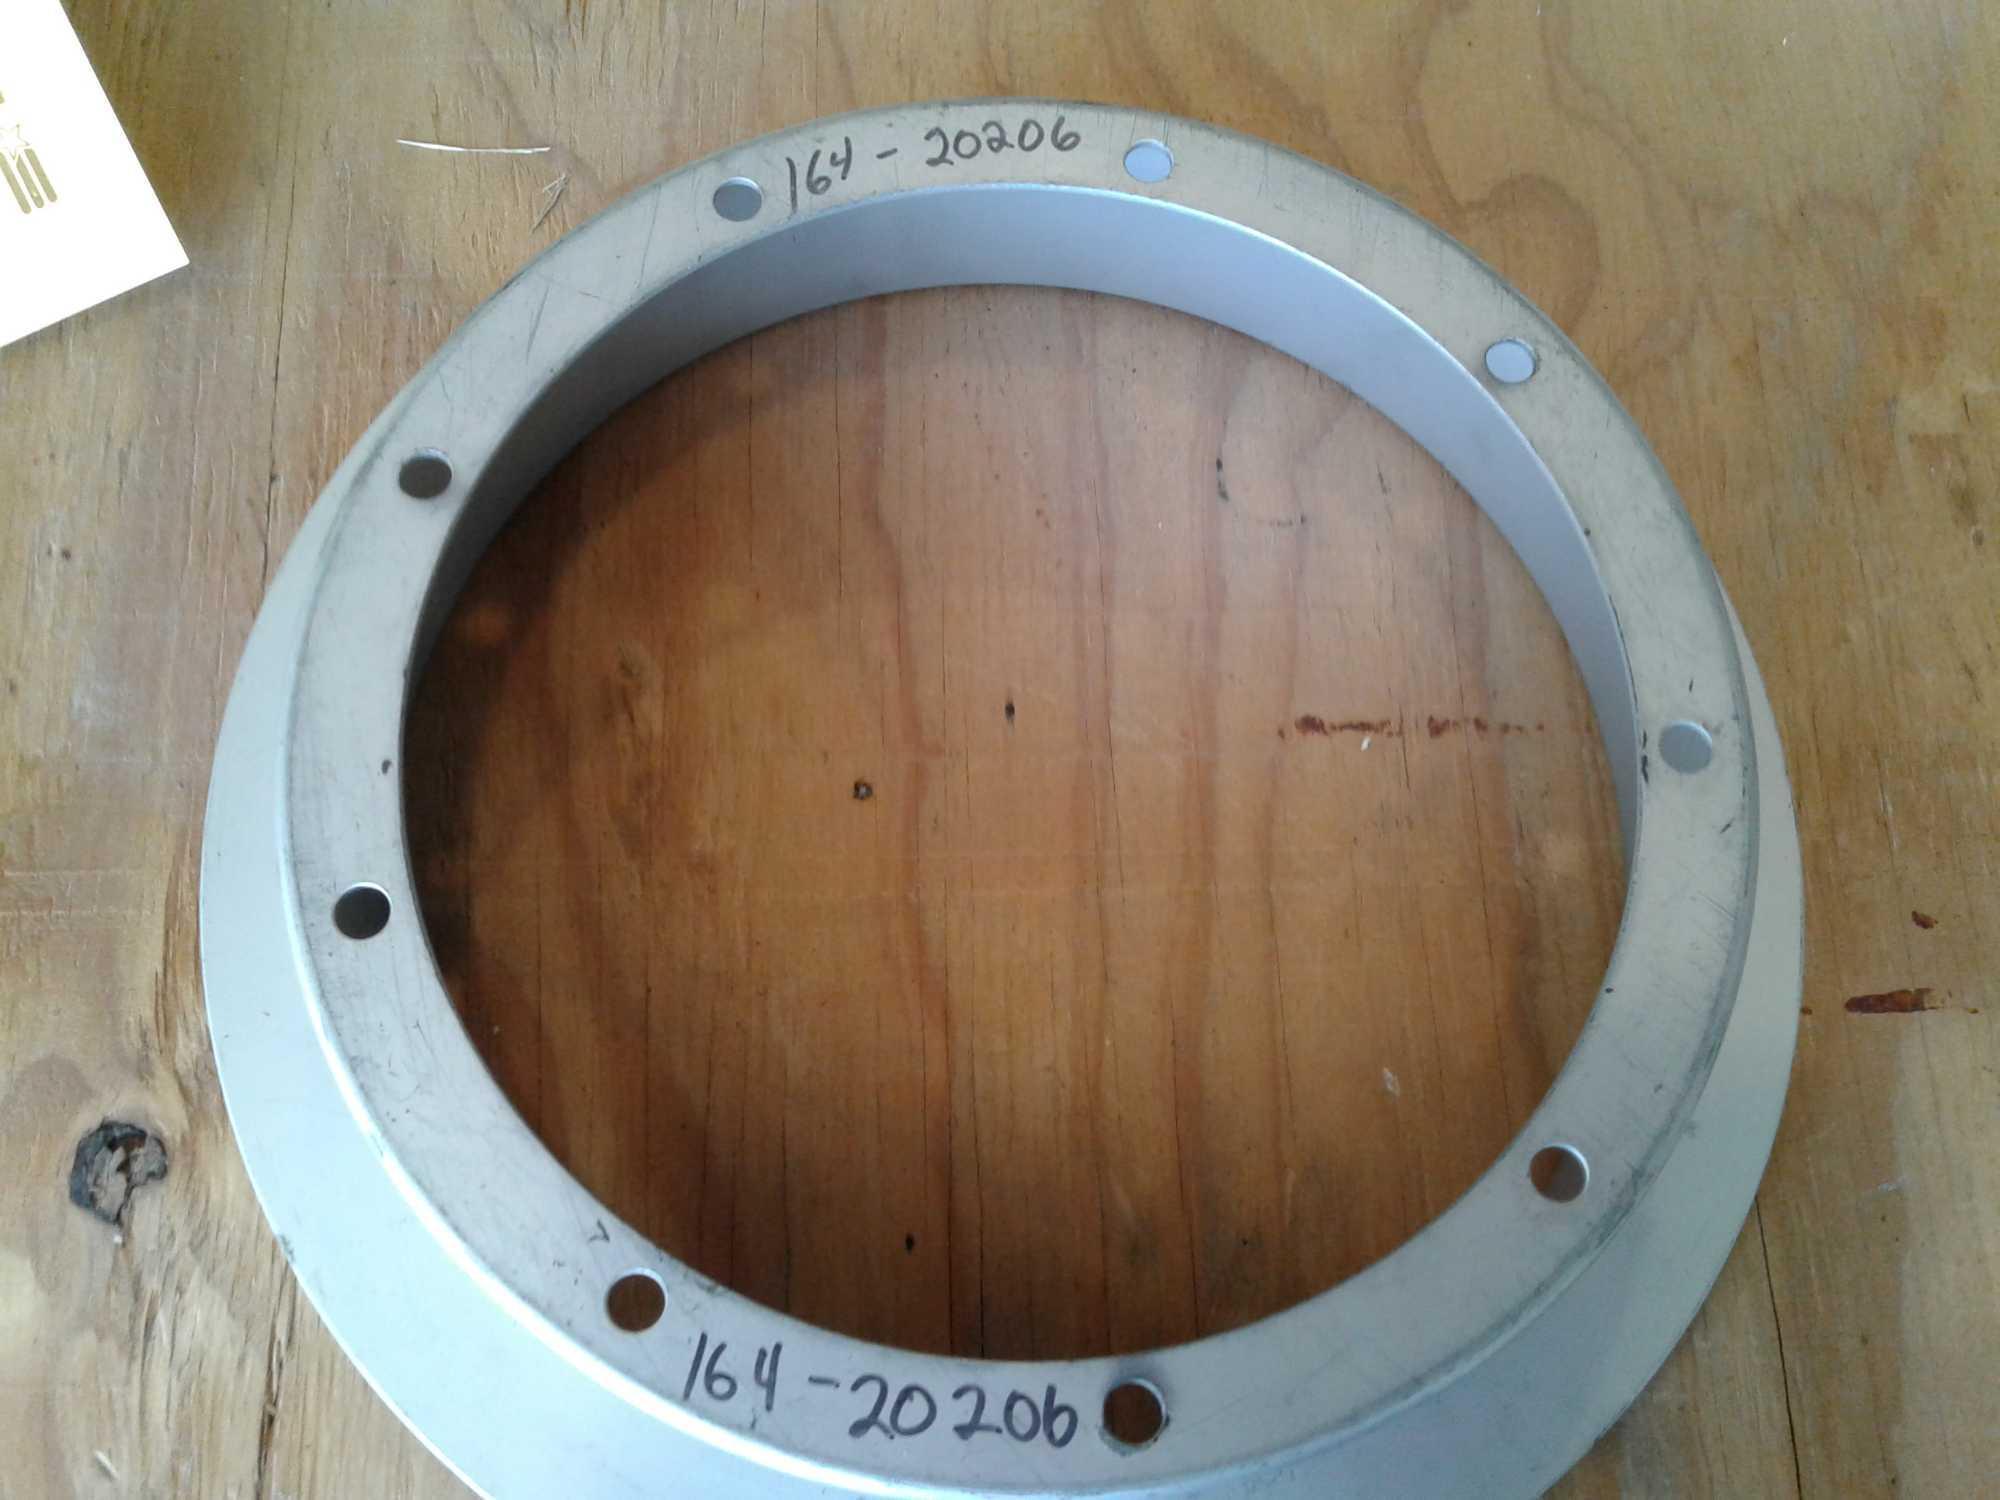 CLEVELAND BRAKE DISC'S 164-20206 (1 APPEARS TO HAVE BEEN INSTALLED)